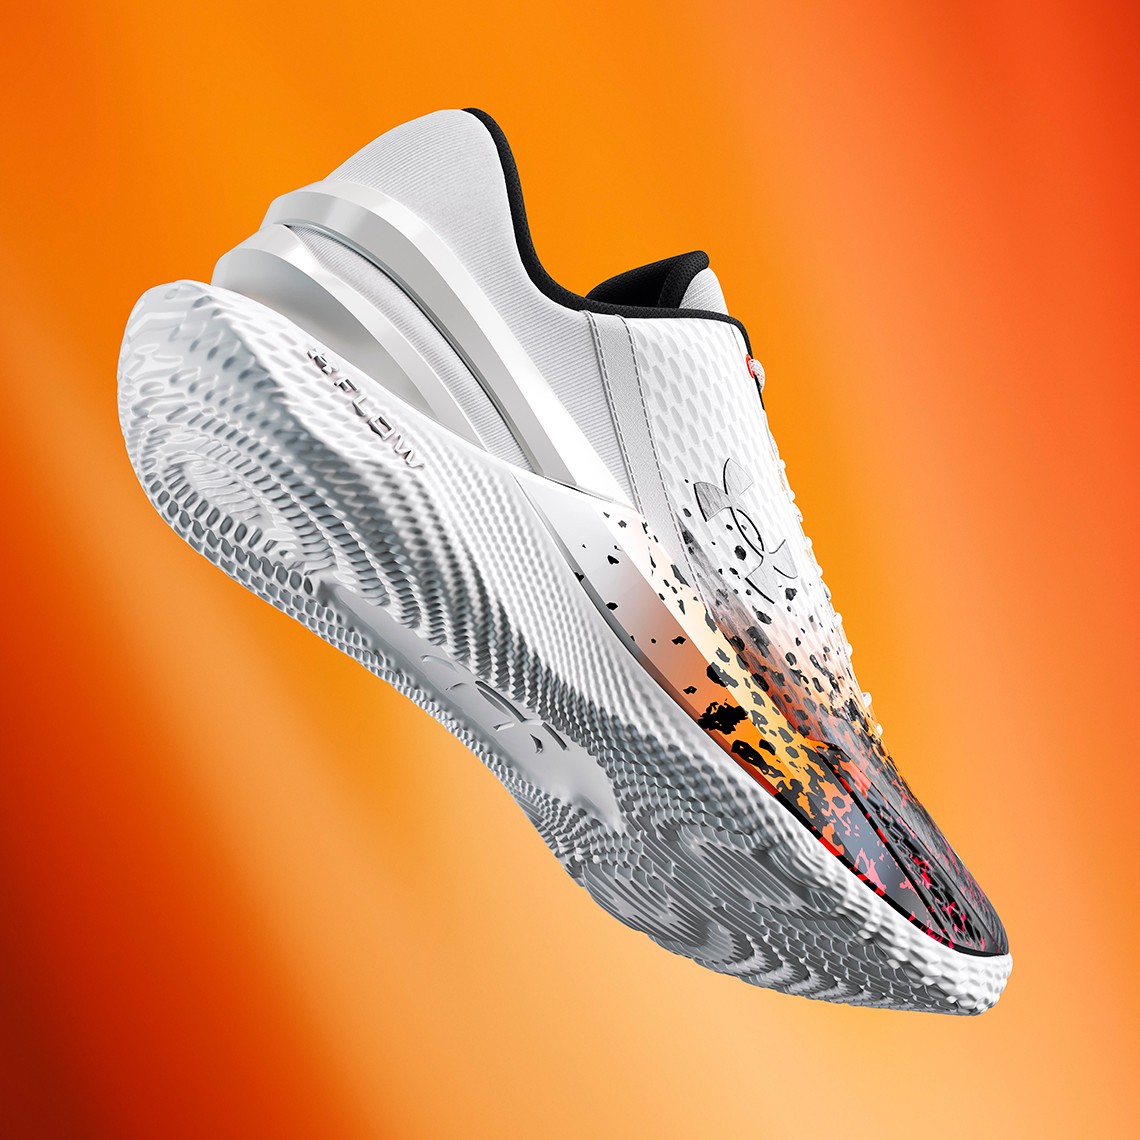 Under Armour Curry Two FloTro,  全新 Curry Two FloTro 官图曝光！发售日期定了！